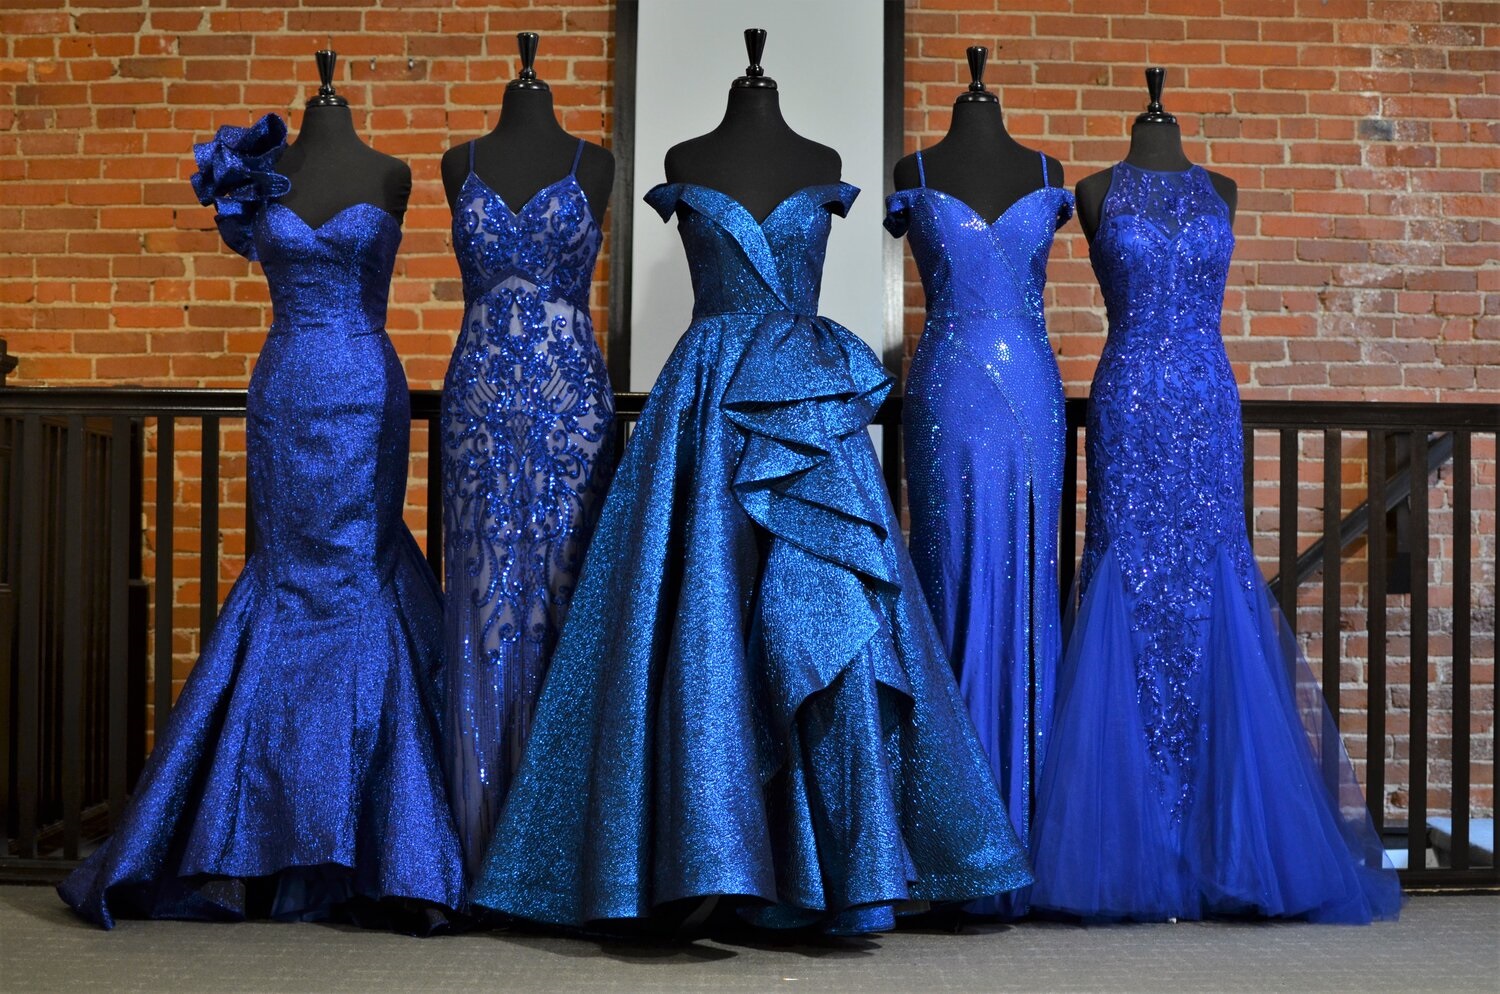 How to Choose a Prom Dress According to Your Budget: The Ultimate Guide